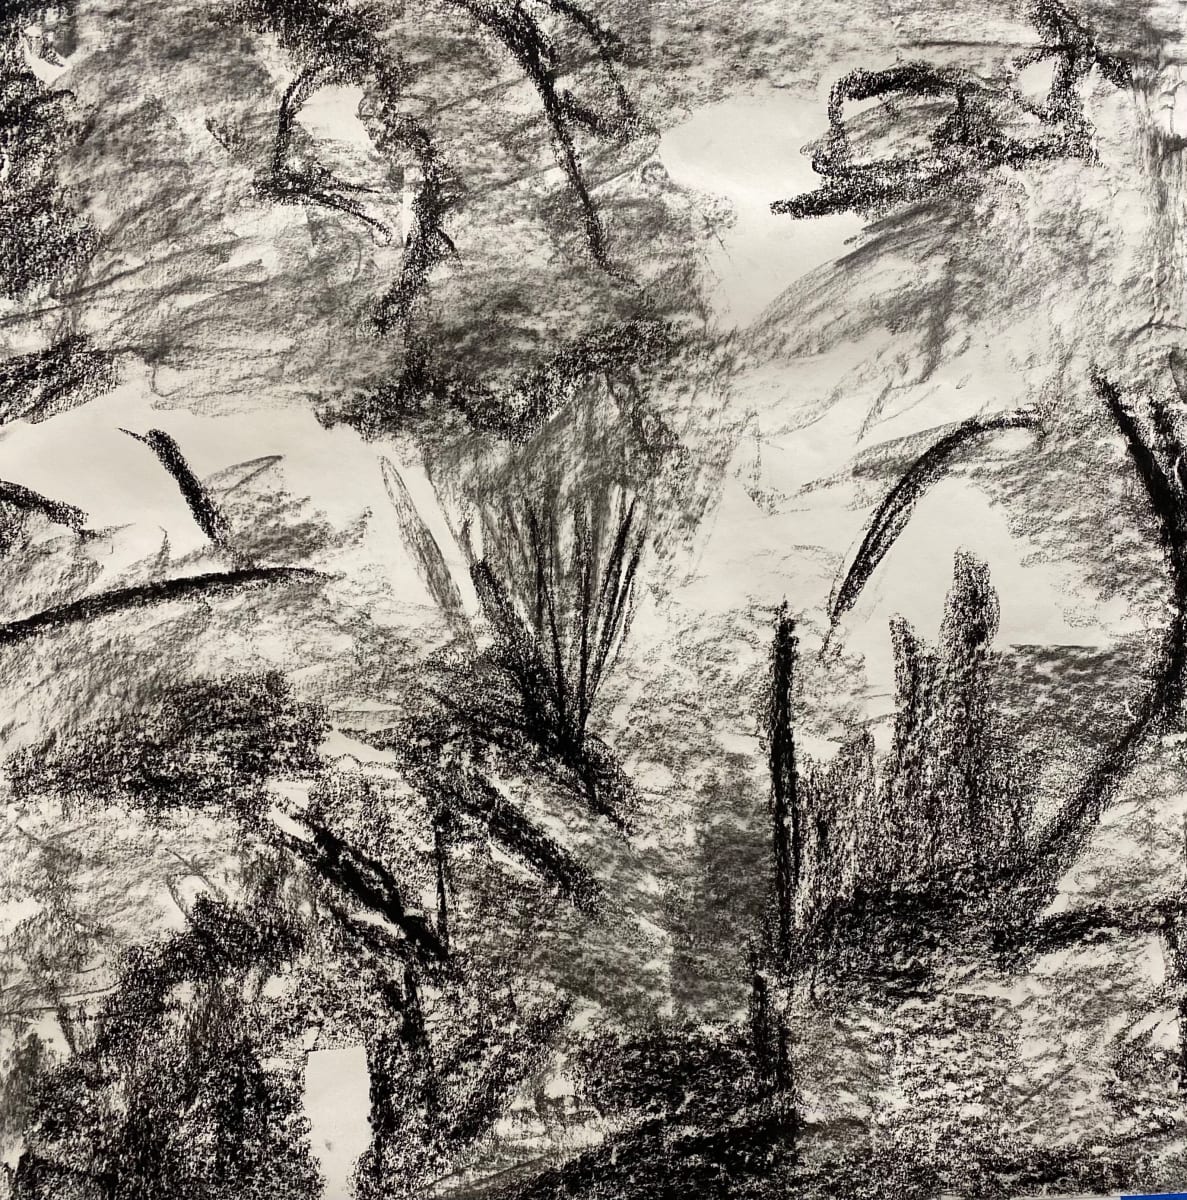 2183, Juanita Bellavance, Sketch16, From the Chestatee River Perspective, 2021, Charkole on paper, 24 x 24 inches 